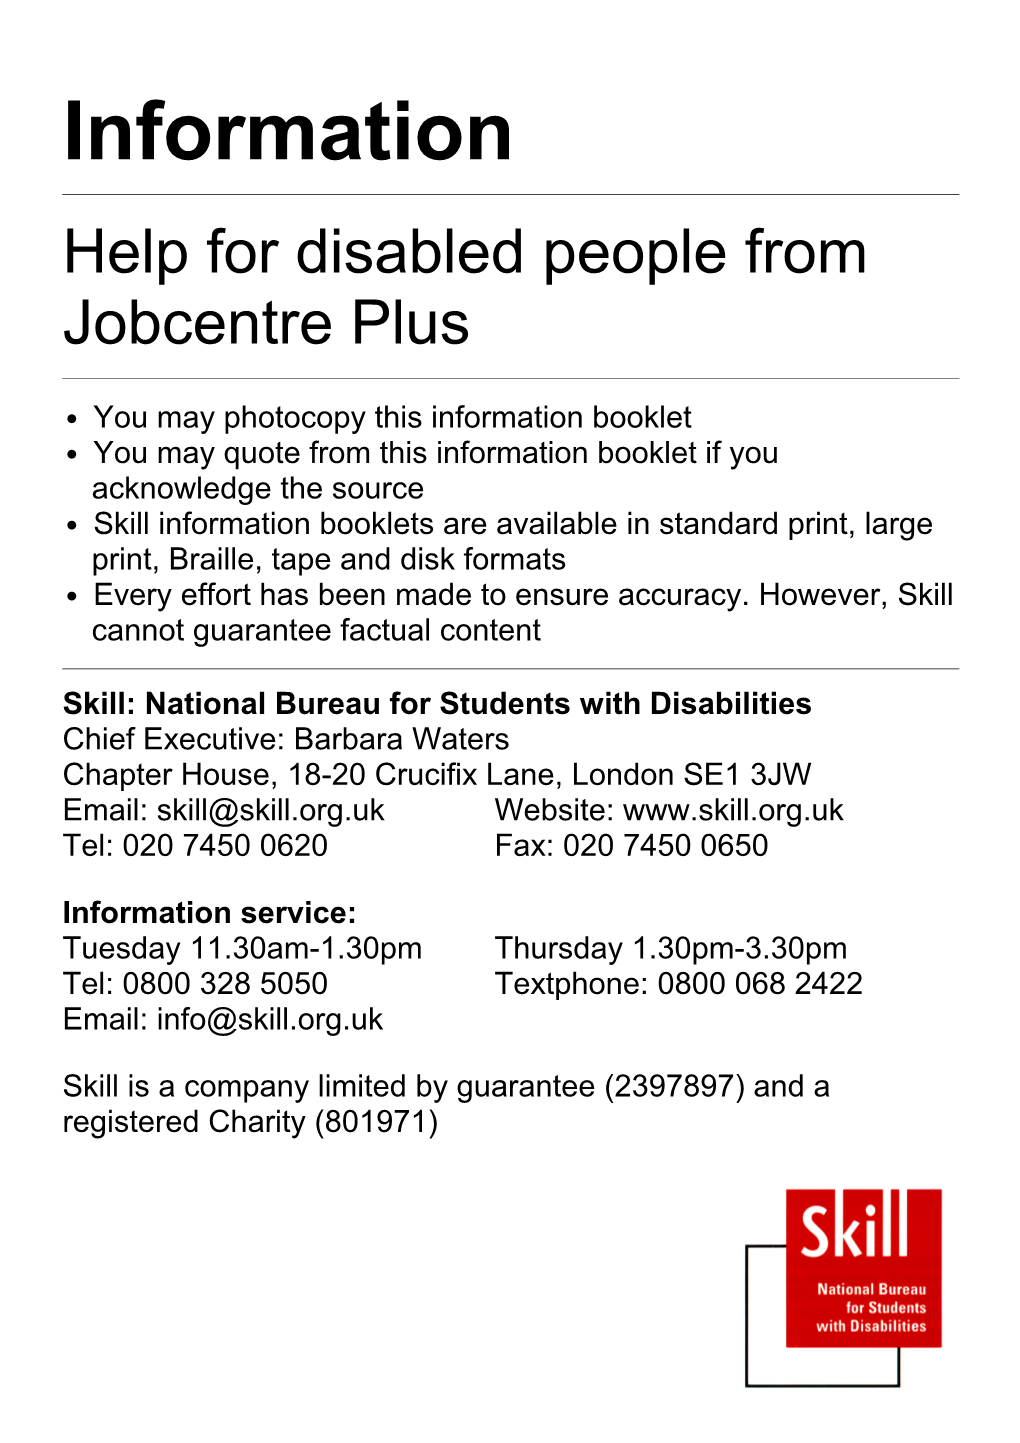 Employment Service Help for Disabled People